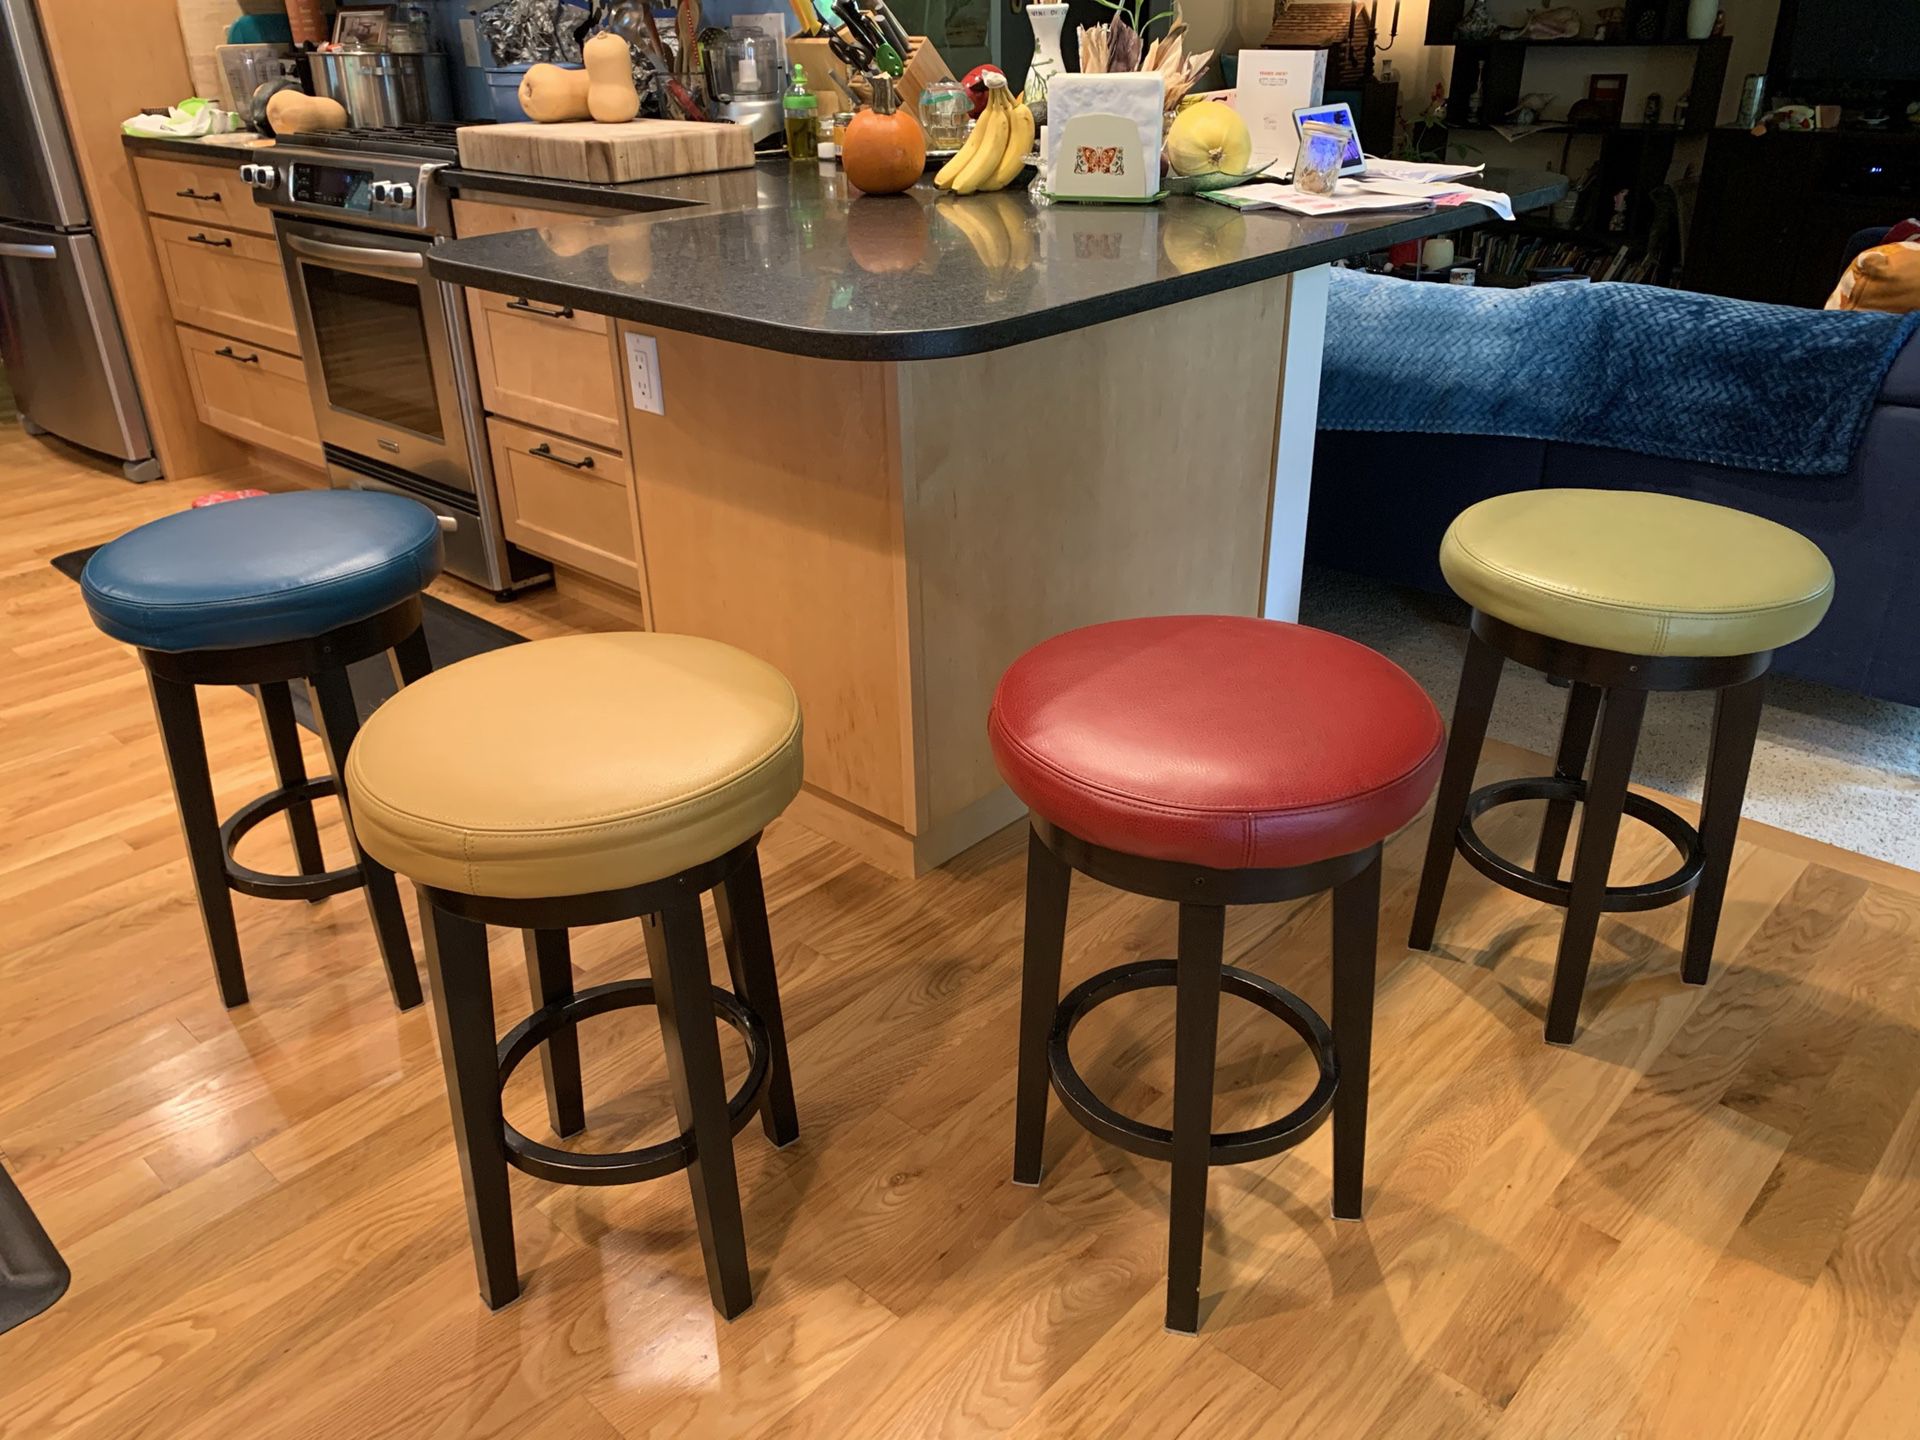 Swivel Leather/Wood Bar Stools-All 4 for $190